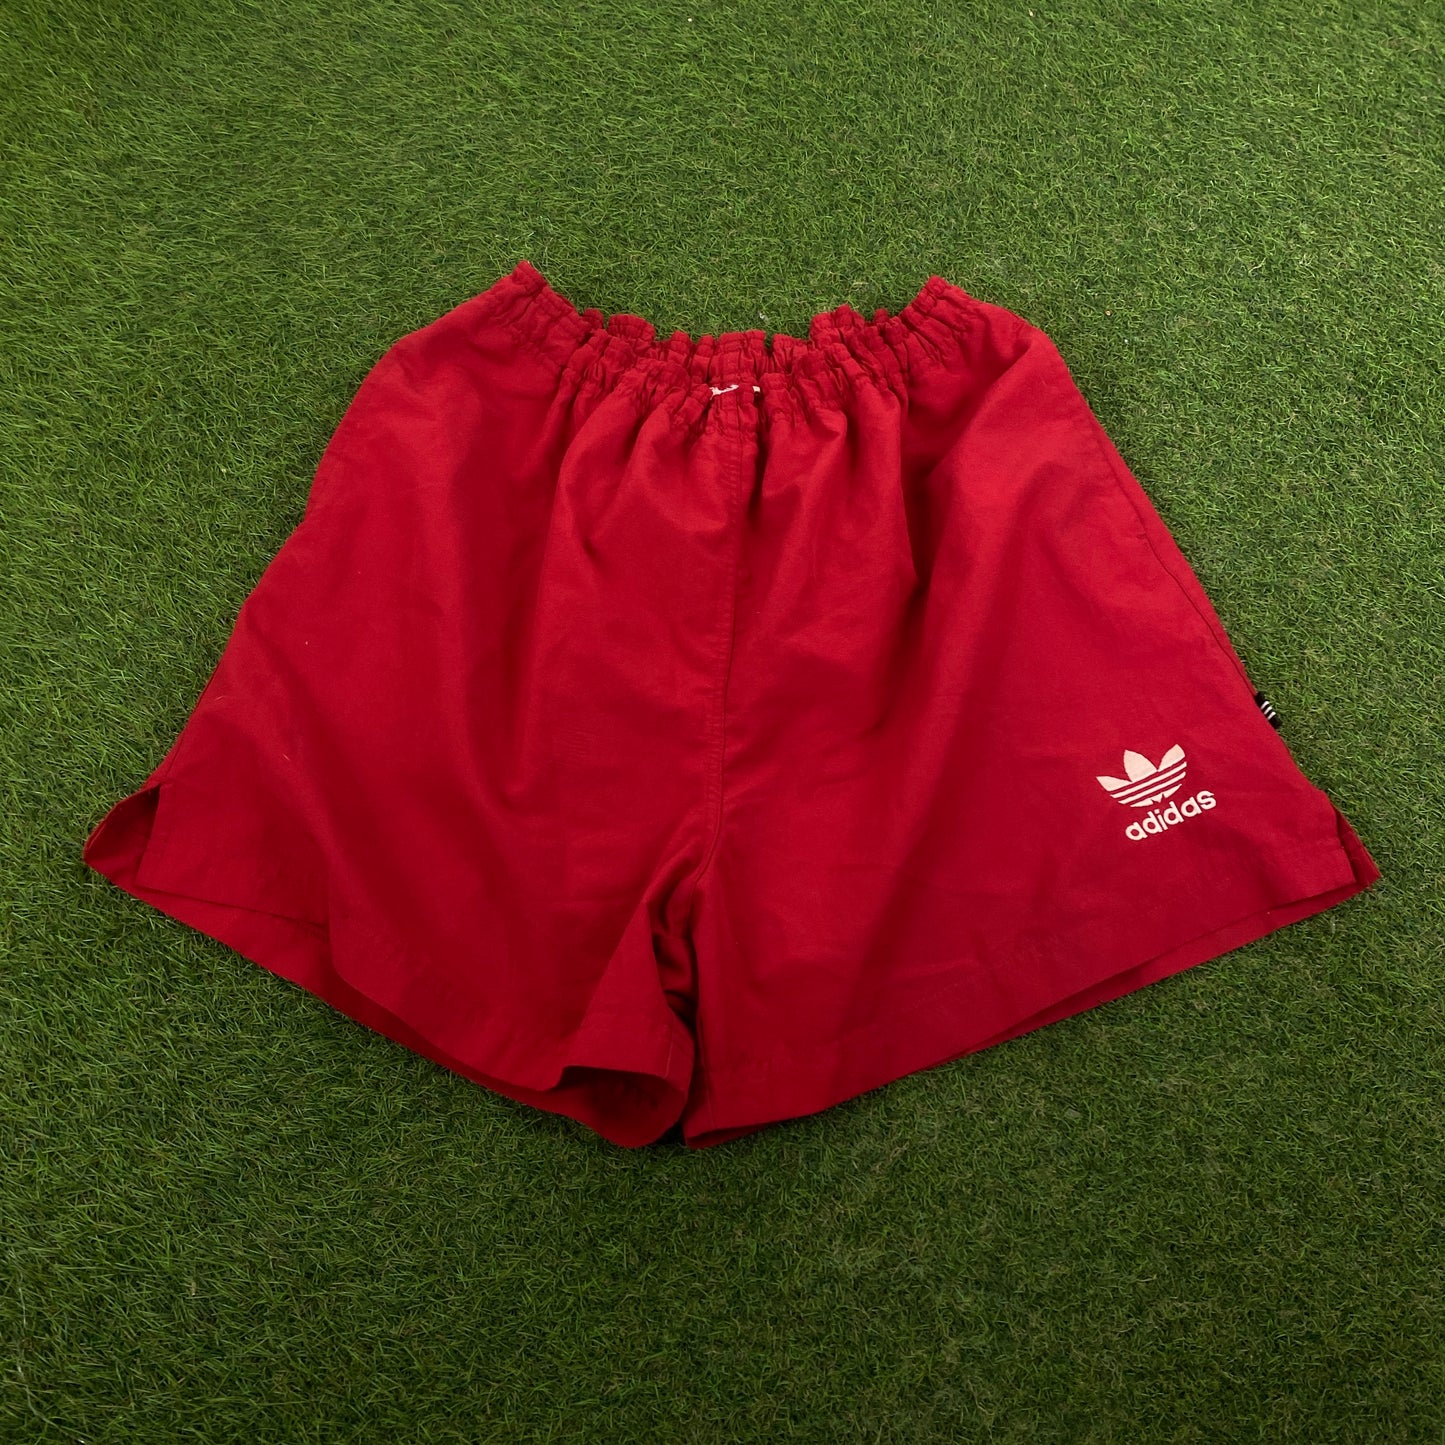 90s Adidas Trefoil Shorts Red Large